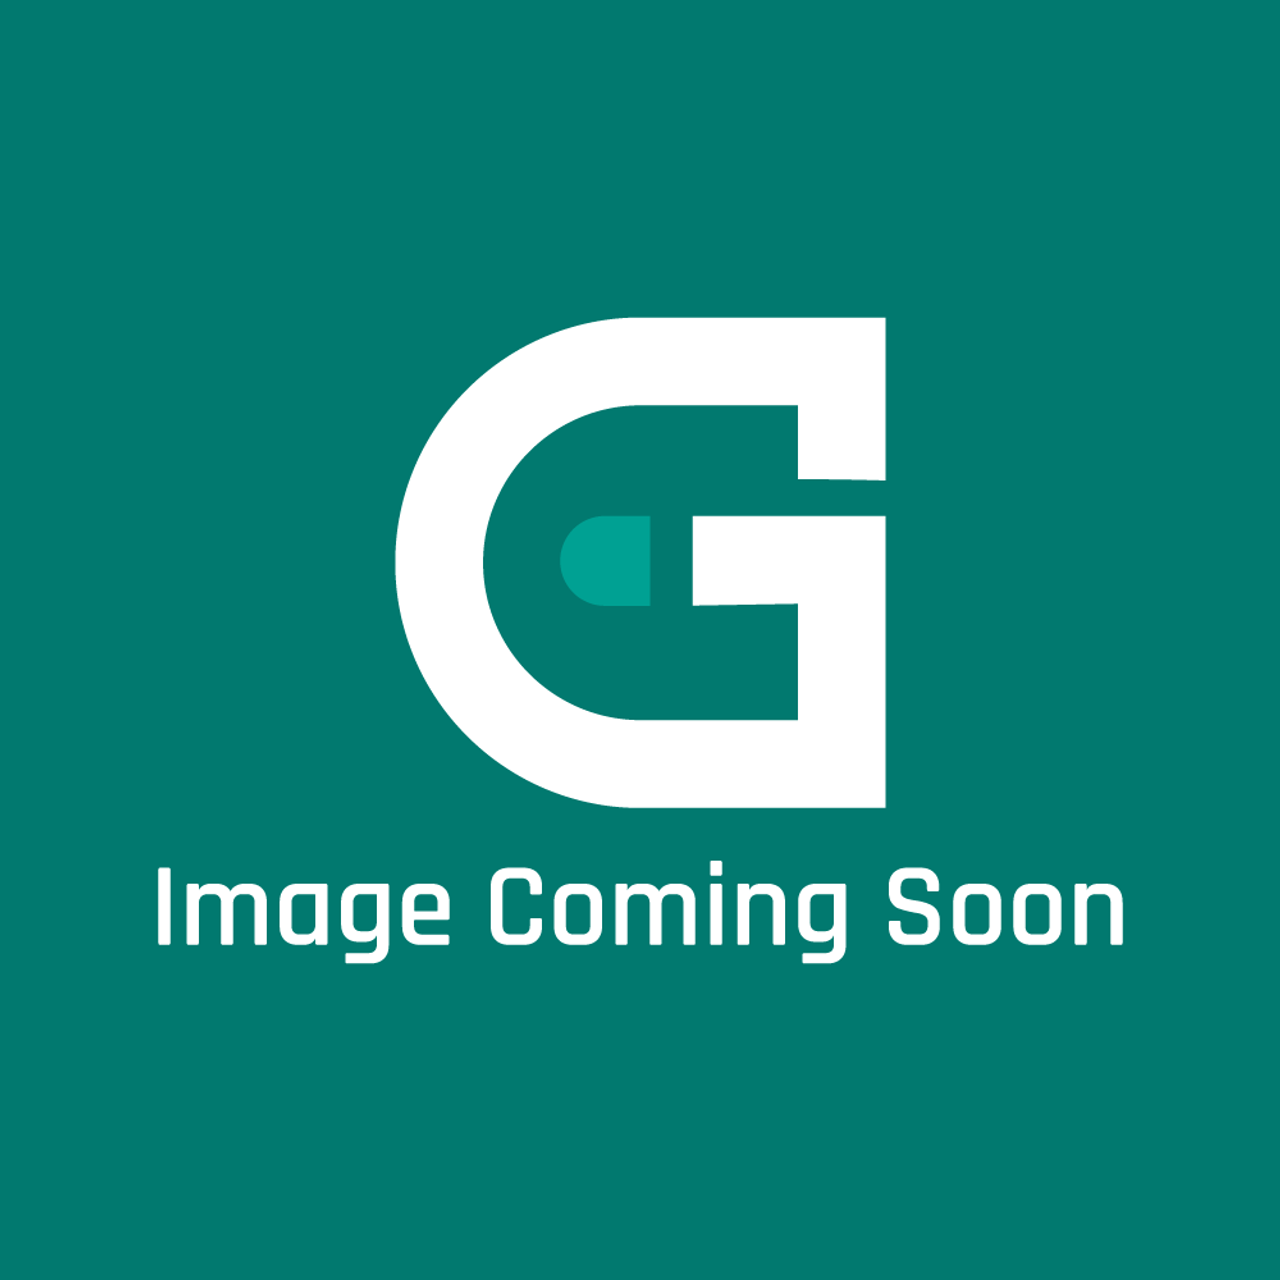 Frigidaire - Electrolux 137578600 Cover - Image Coming Soon!